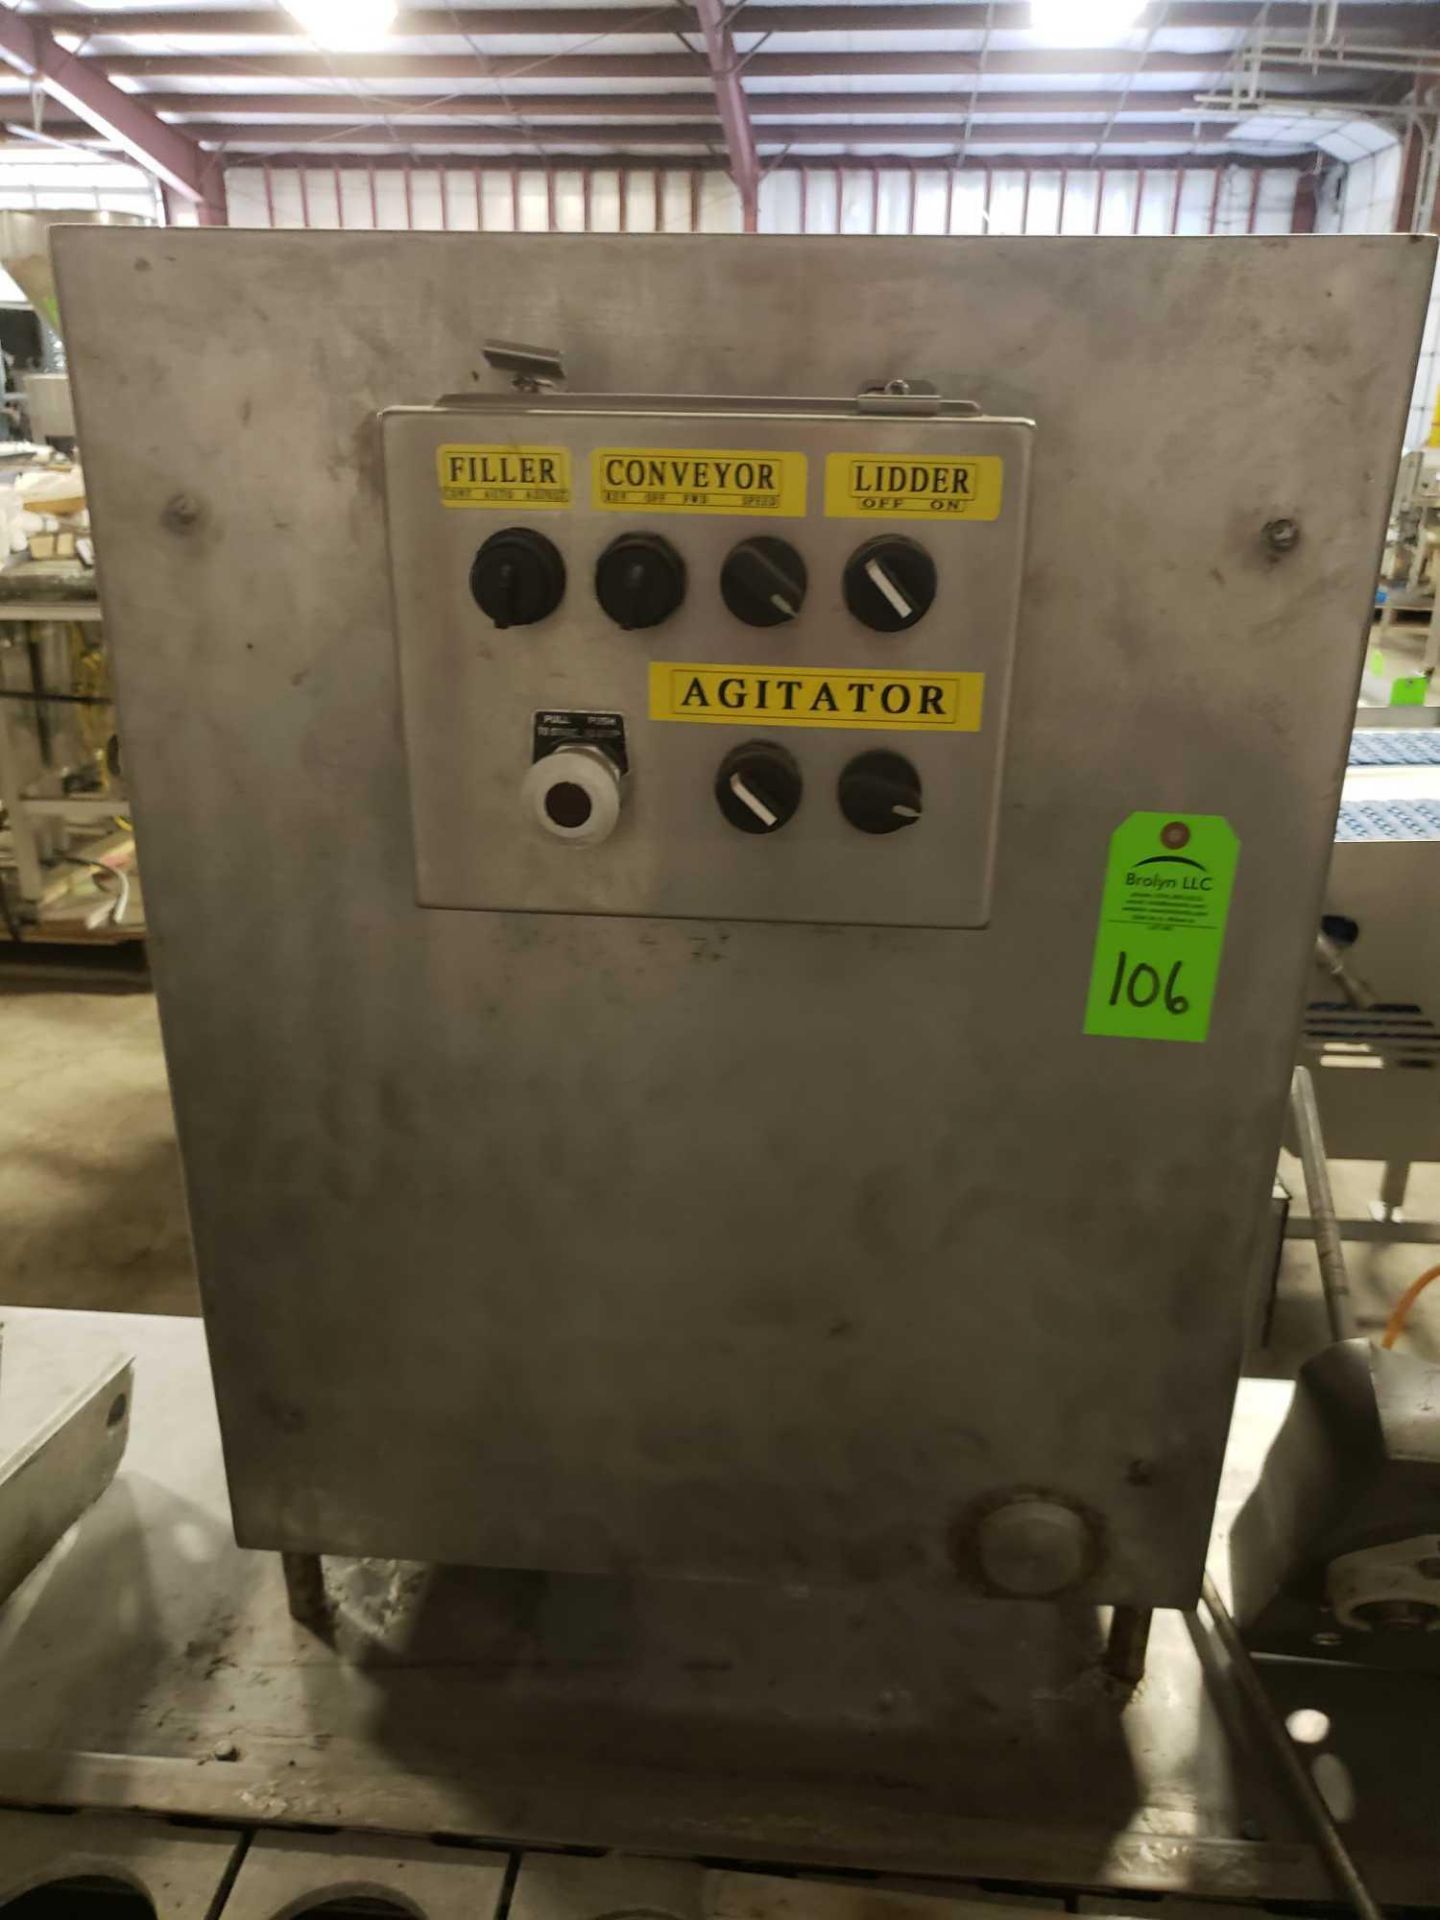 Stainless cup sealing machine. No brand markings. Allen Bradley electrical controls. - Image 2 of 9